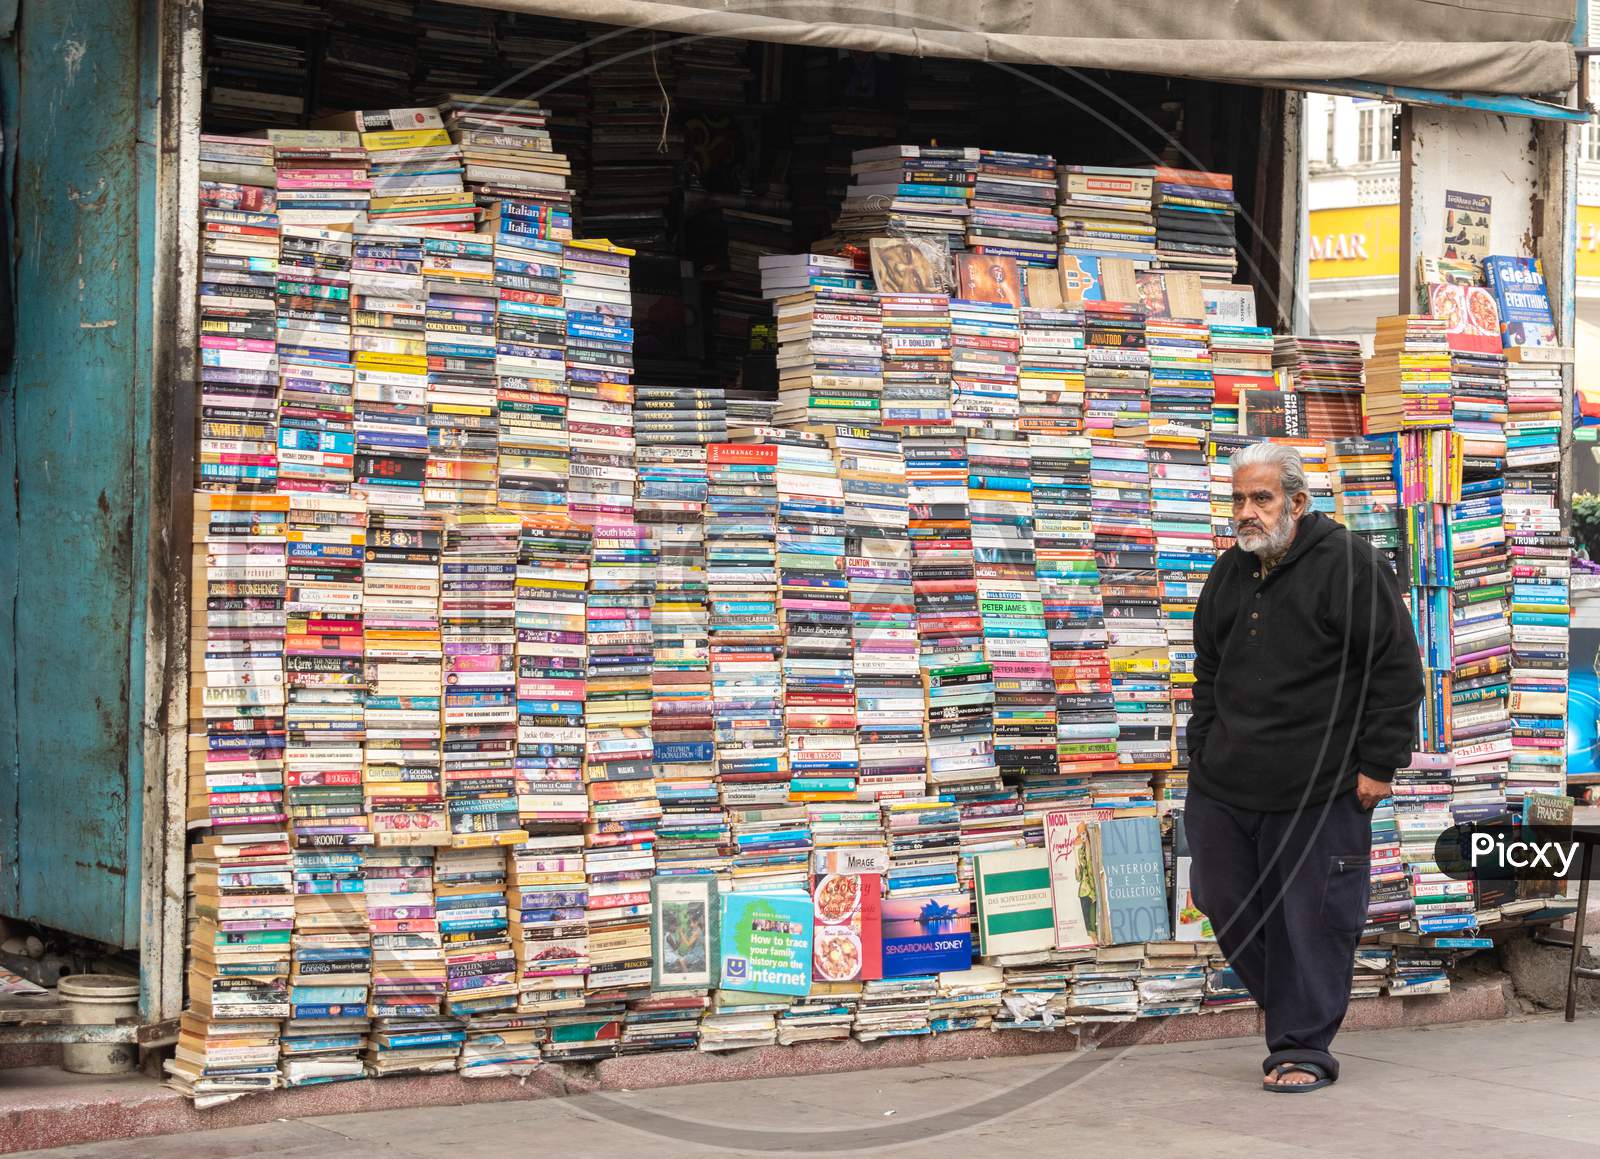 A book store at Connaught place